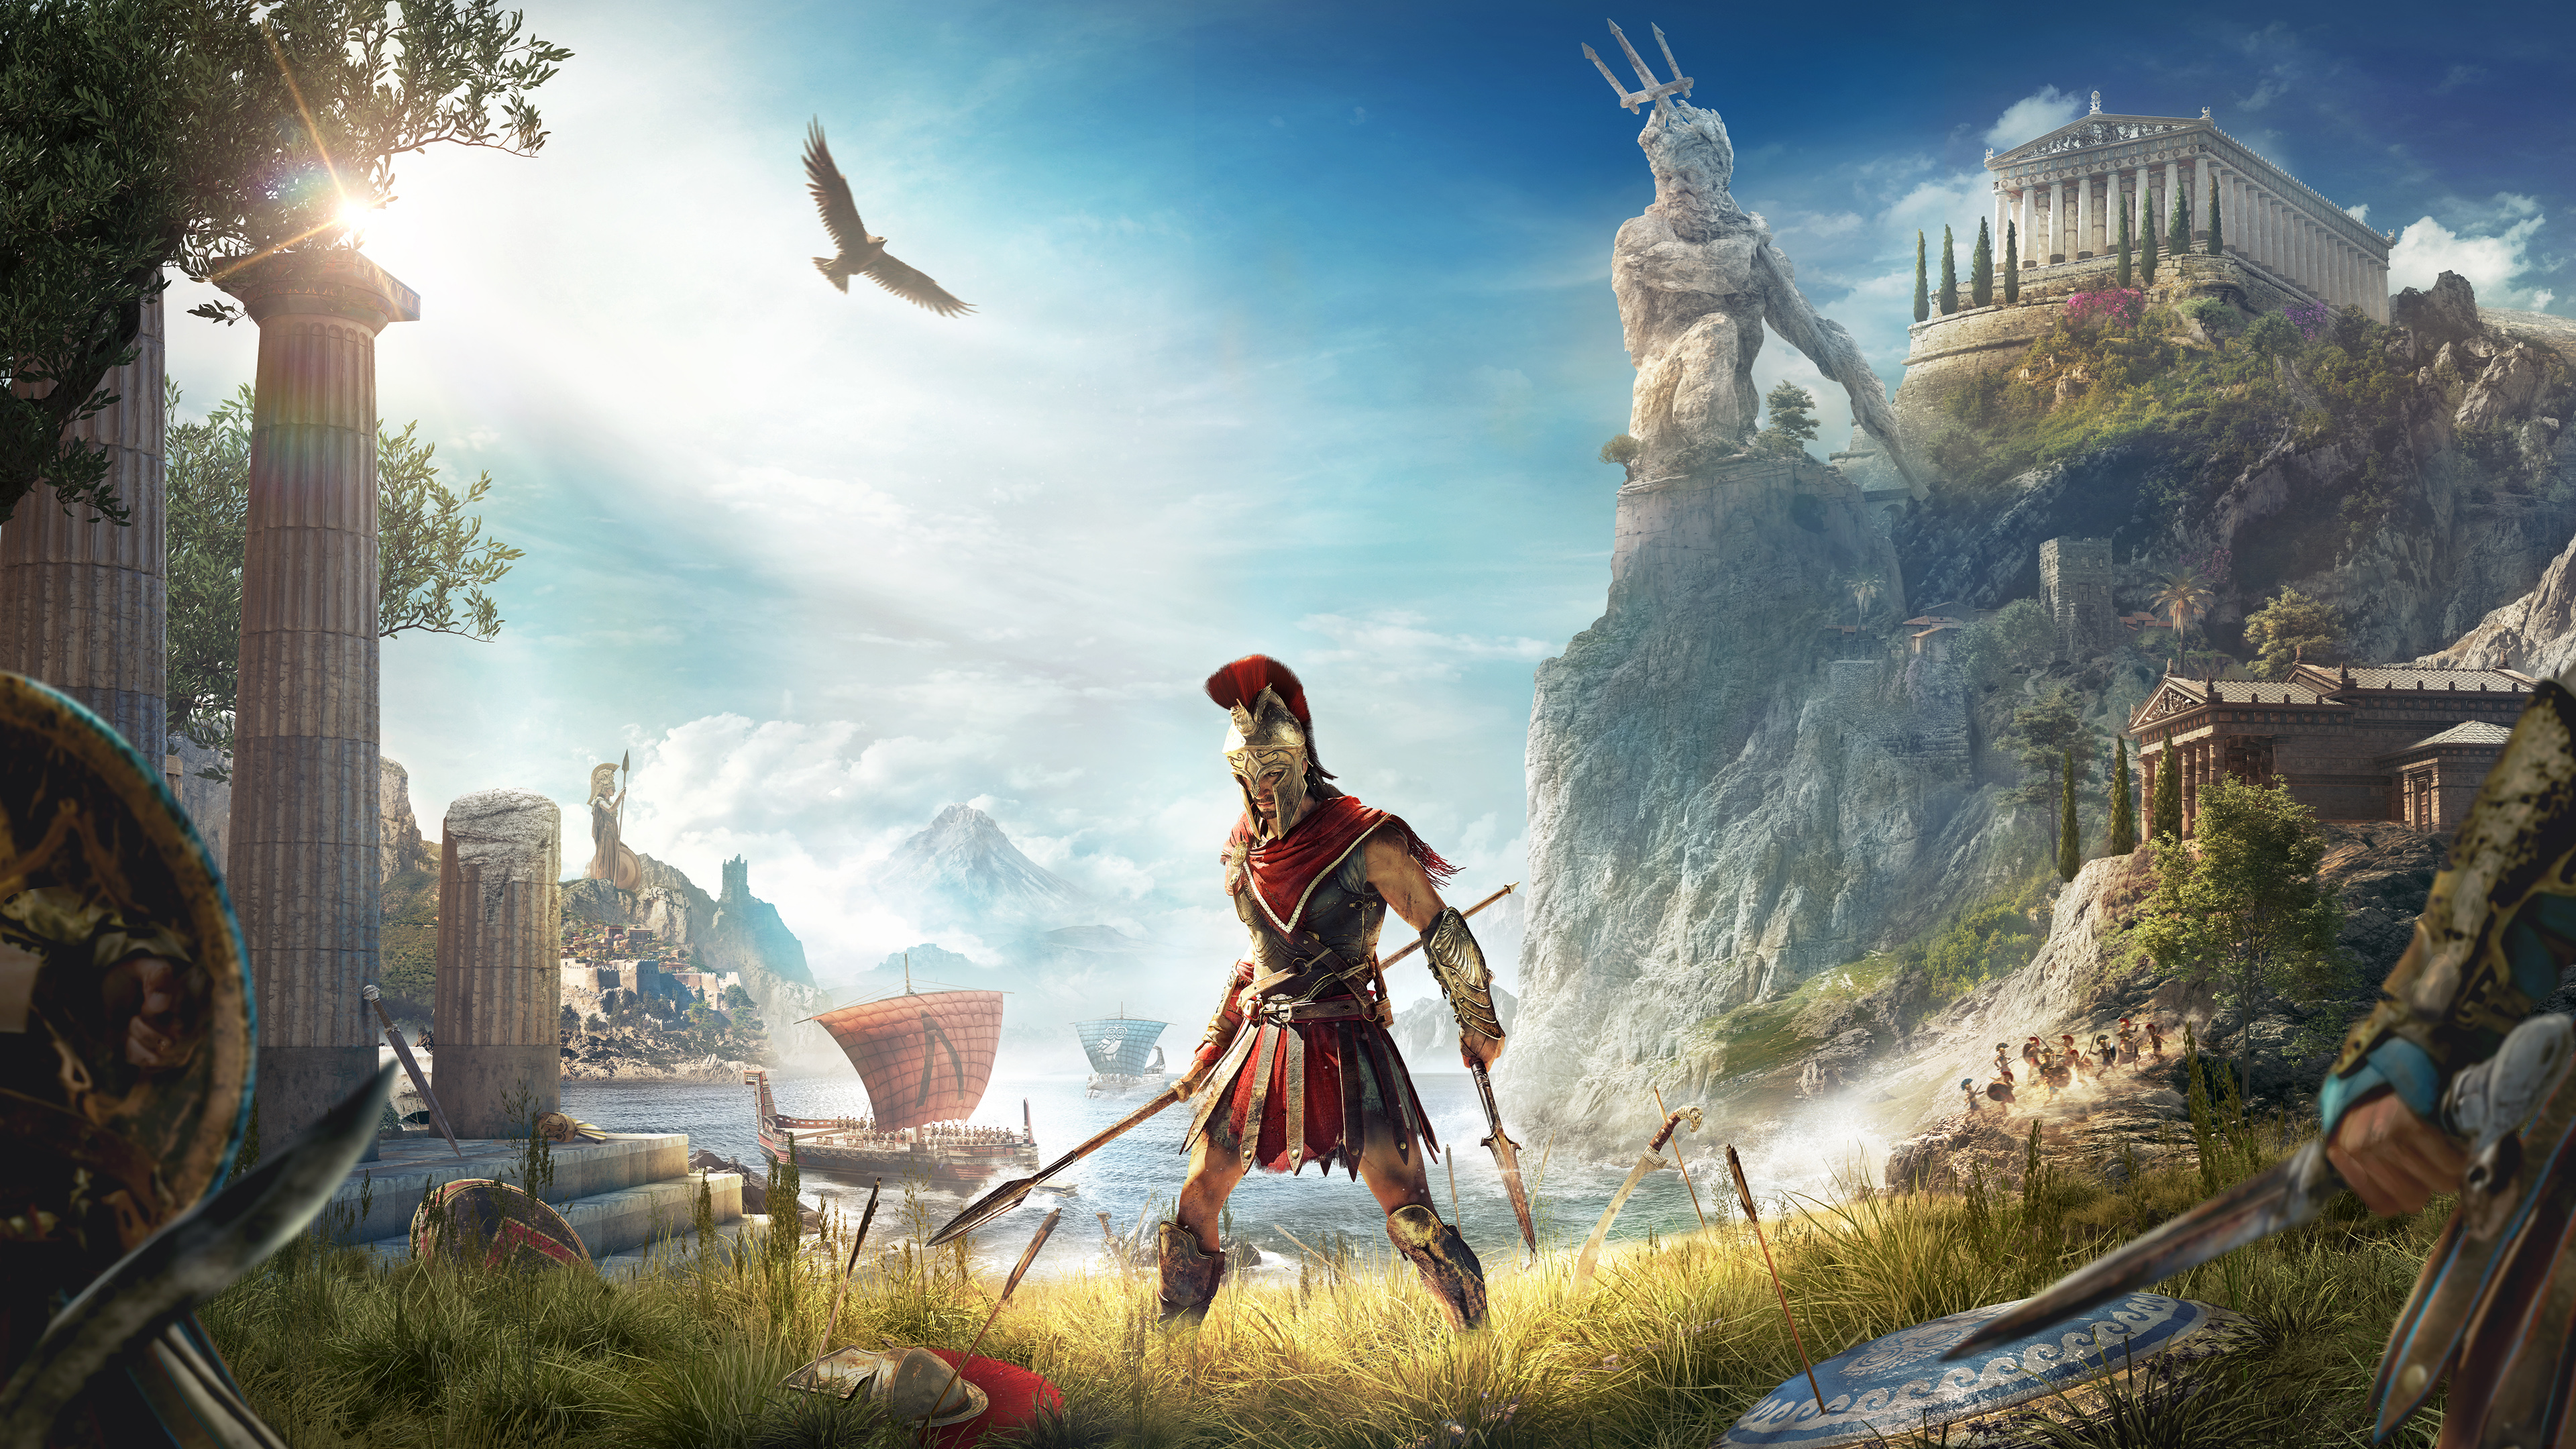 Assassins Creed Odyssey 2018 4k, HD Games, 4k Wallpapers, Images